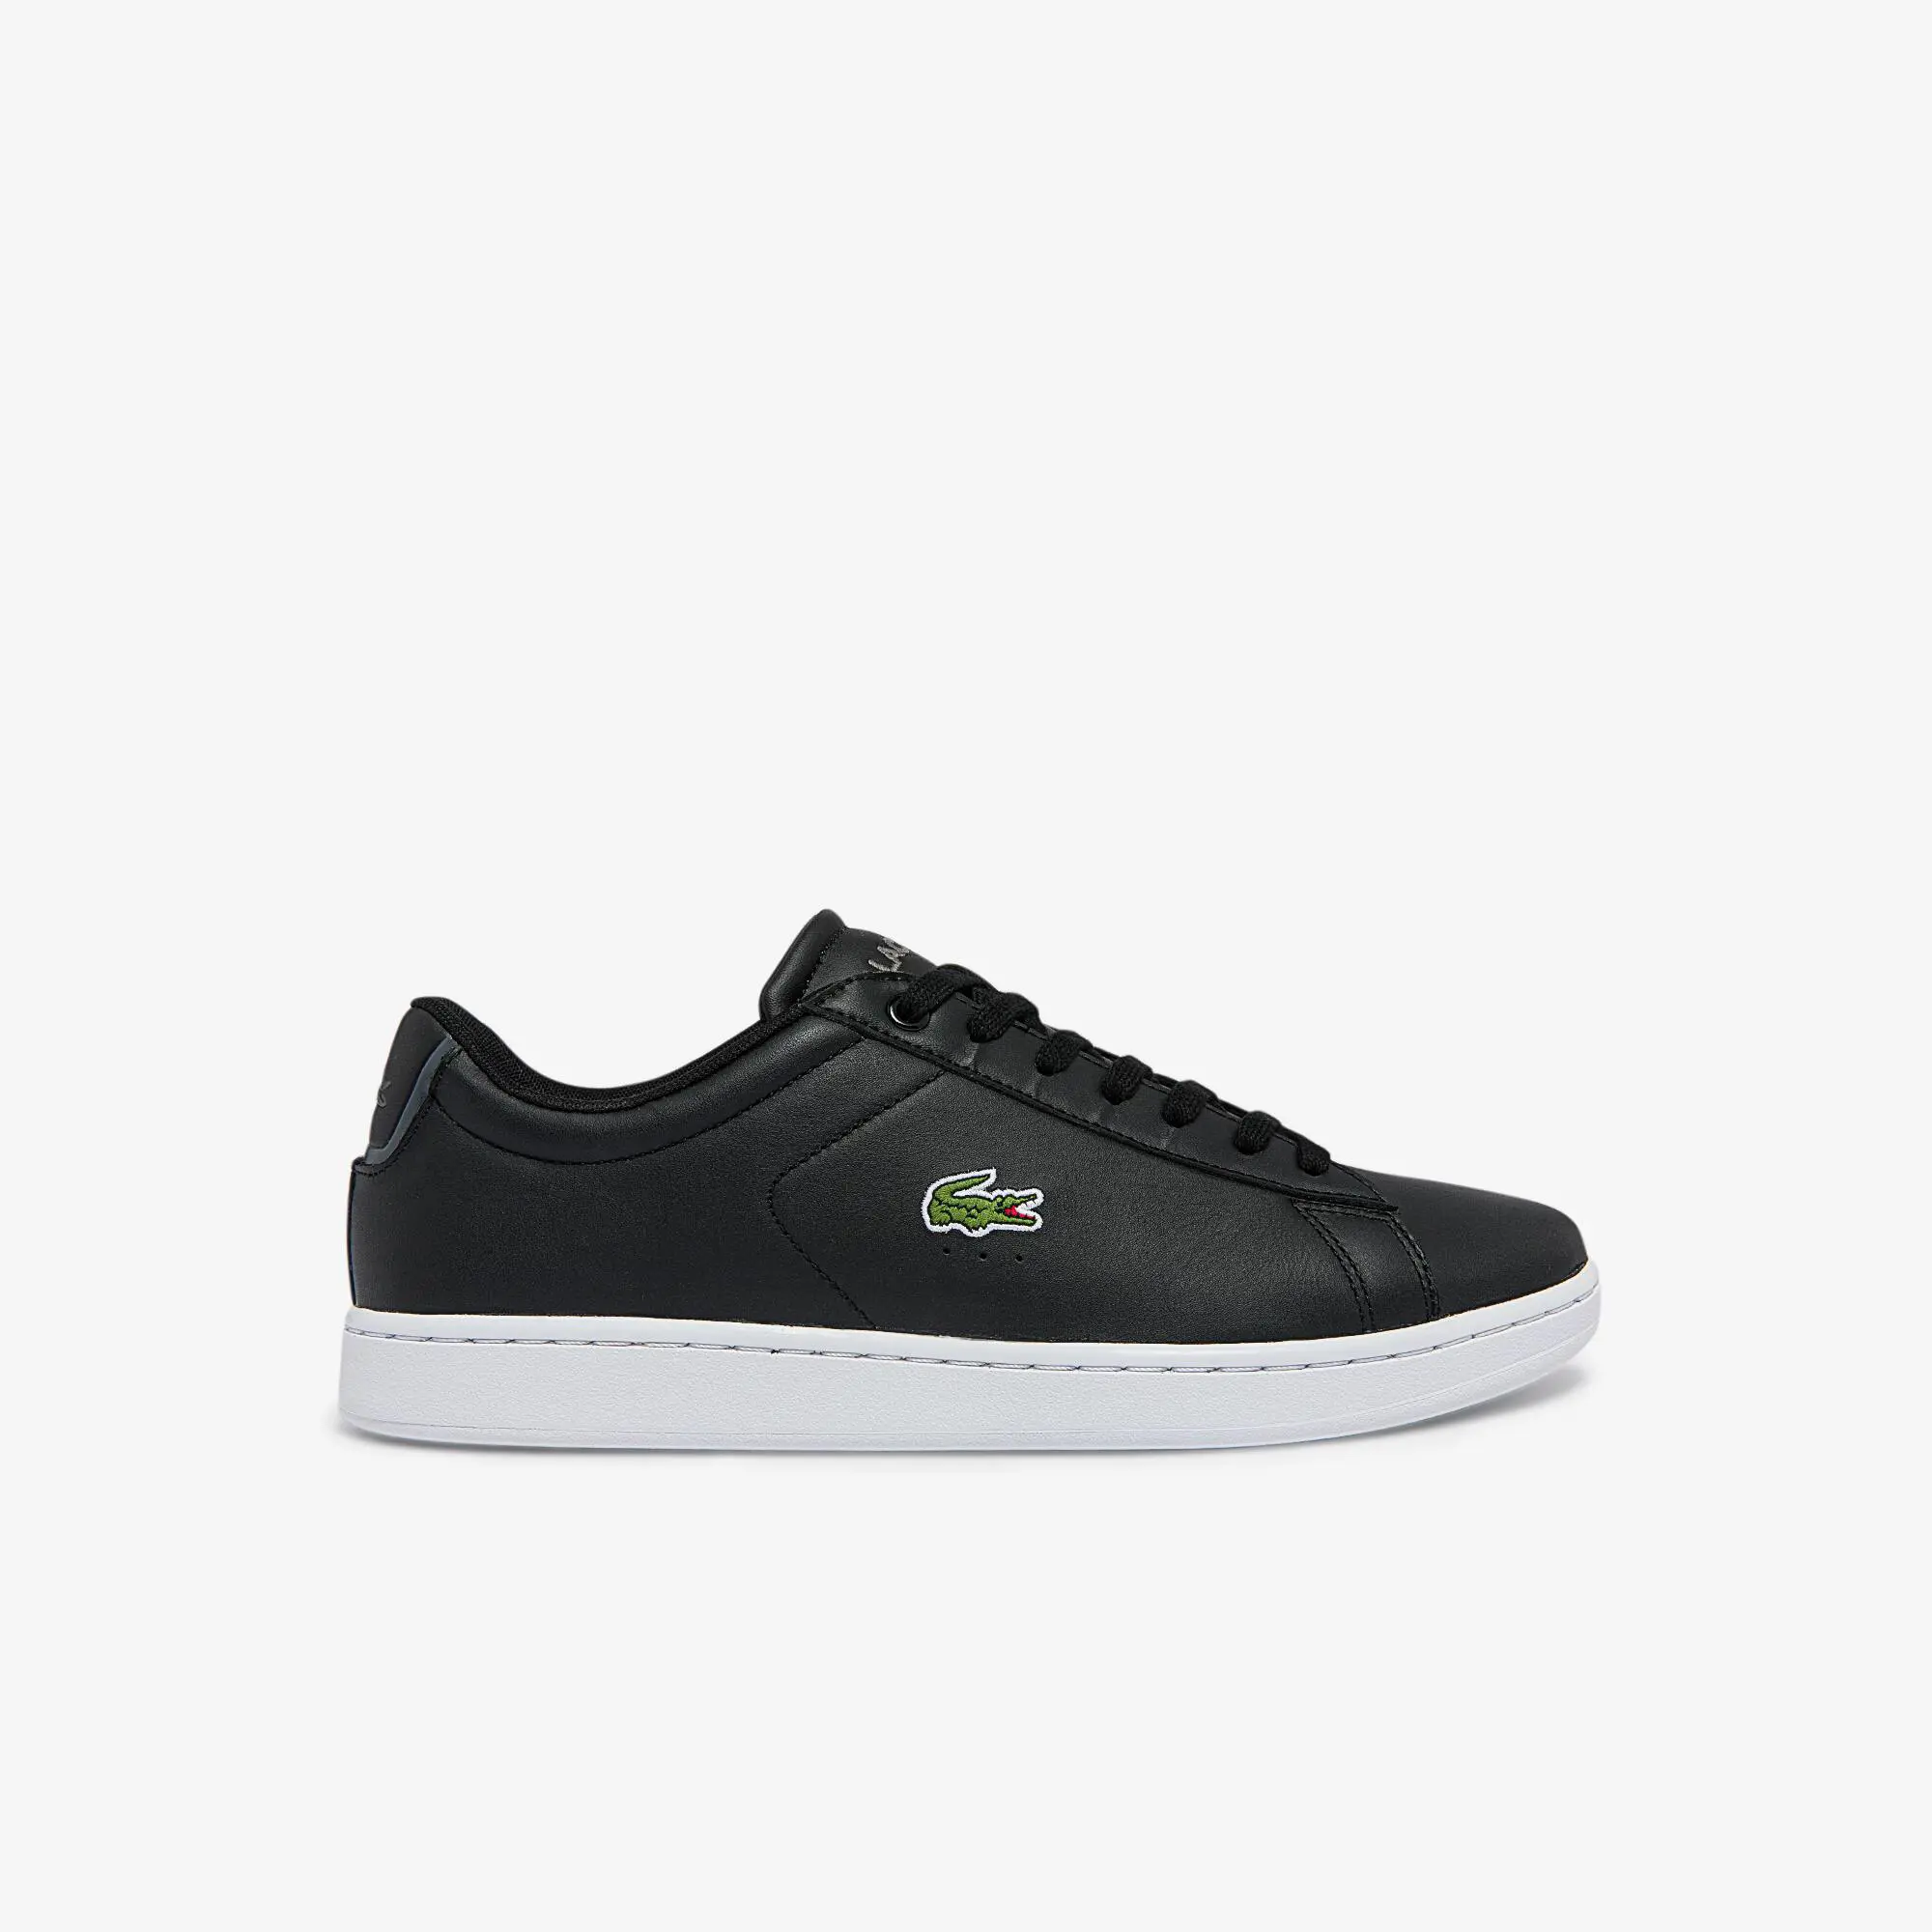 Lacoste Men's Carnaby BL Leather Trainers. 1